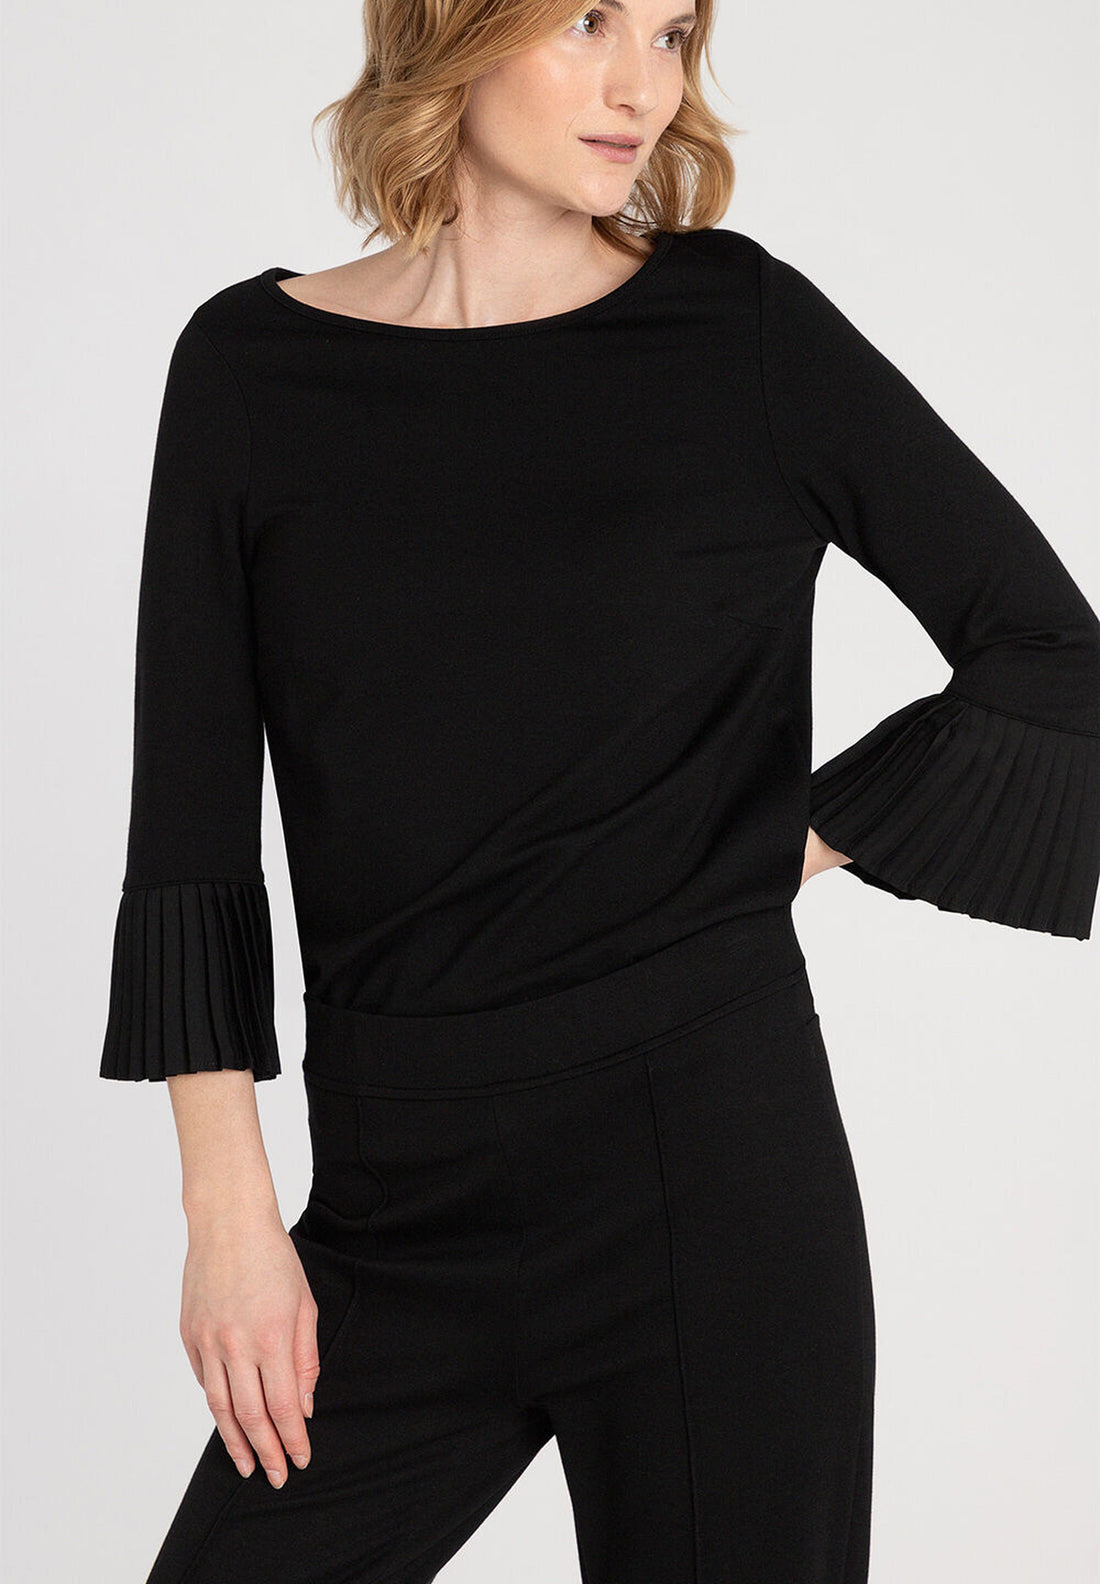 Black Jersey Shirt With Pleated Sleeves_41010202_0790_01